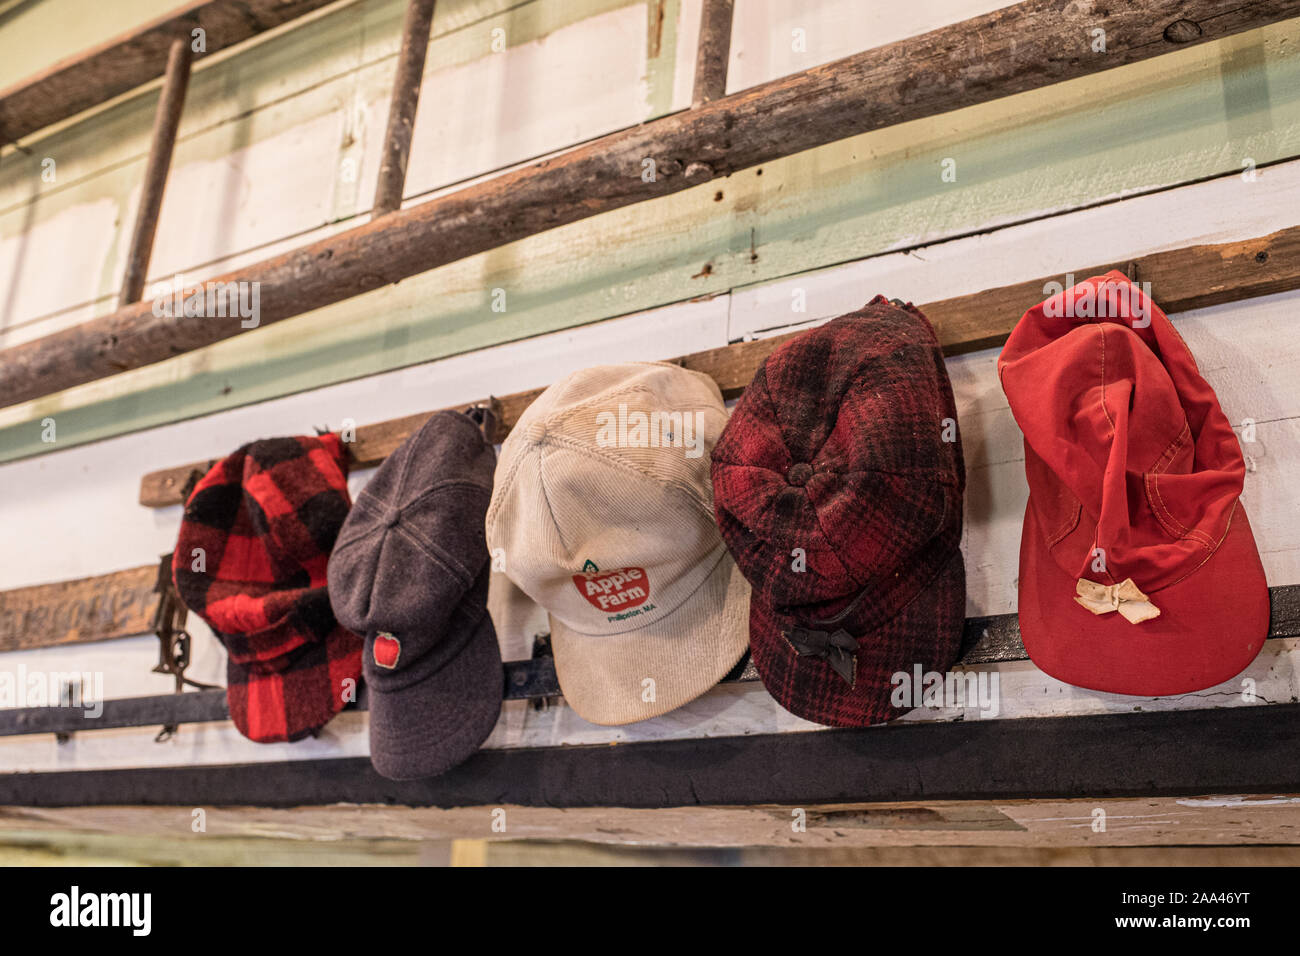 Hats hanging up in a farm store Stock Photo